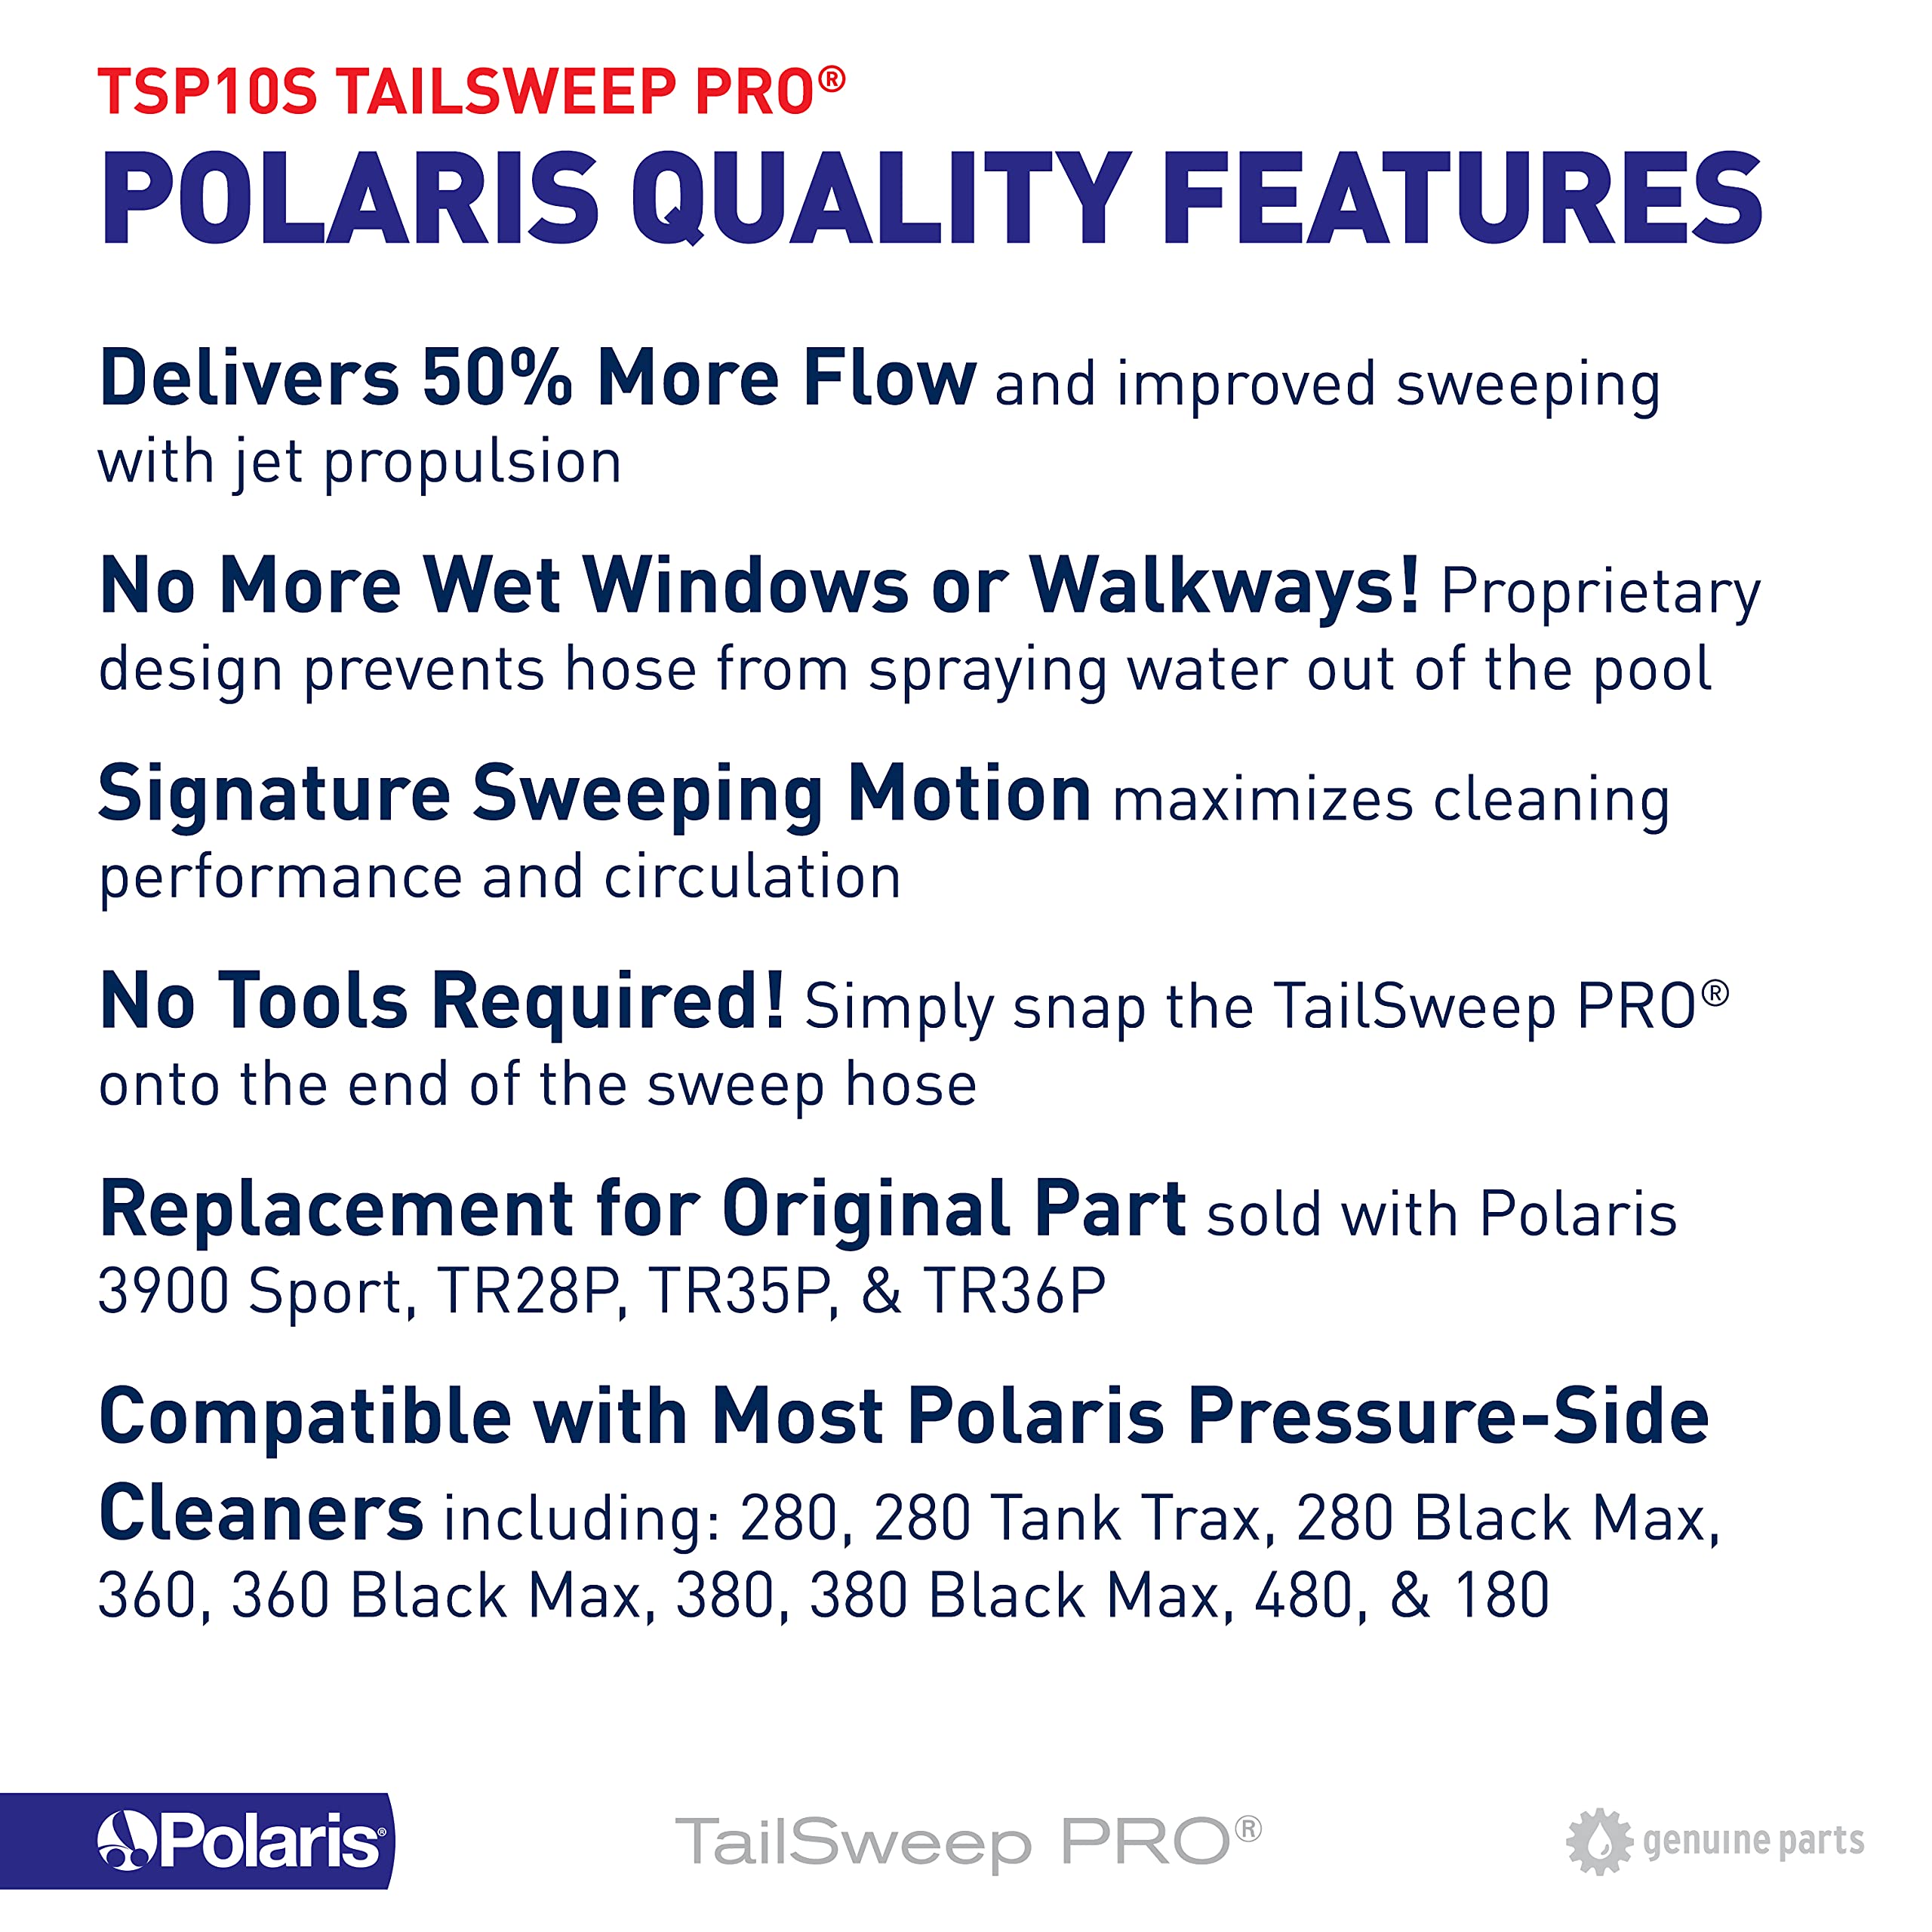 Polaris Genuine Parts TSP10S TailSweep PRO Replacement for Polaris Pressure-Side Pool Cleaners 280, 3900 Sport, 380, 360, 180